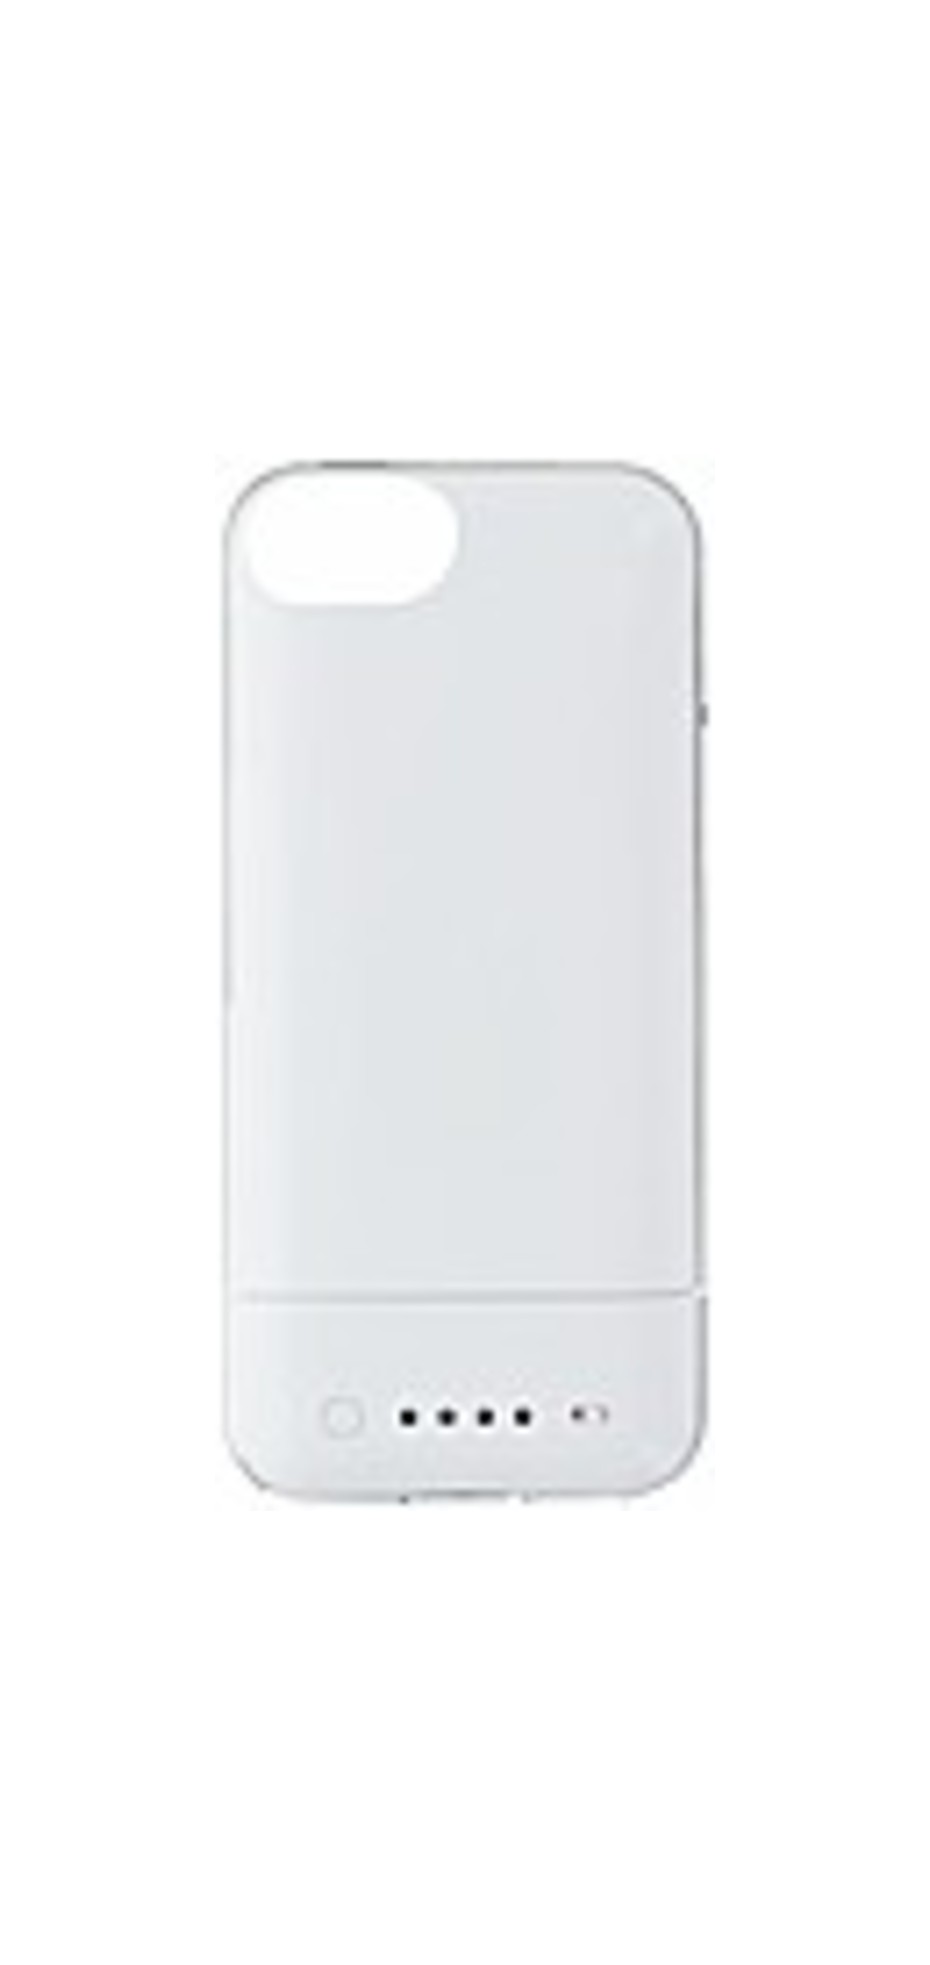 Mophie juice pack air - iPhone 5 - For iPhone - White